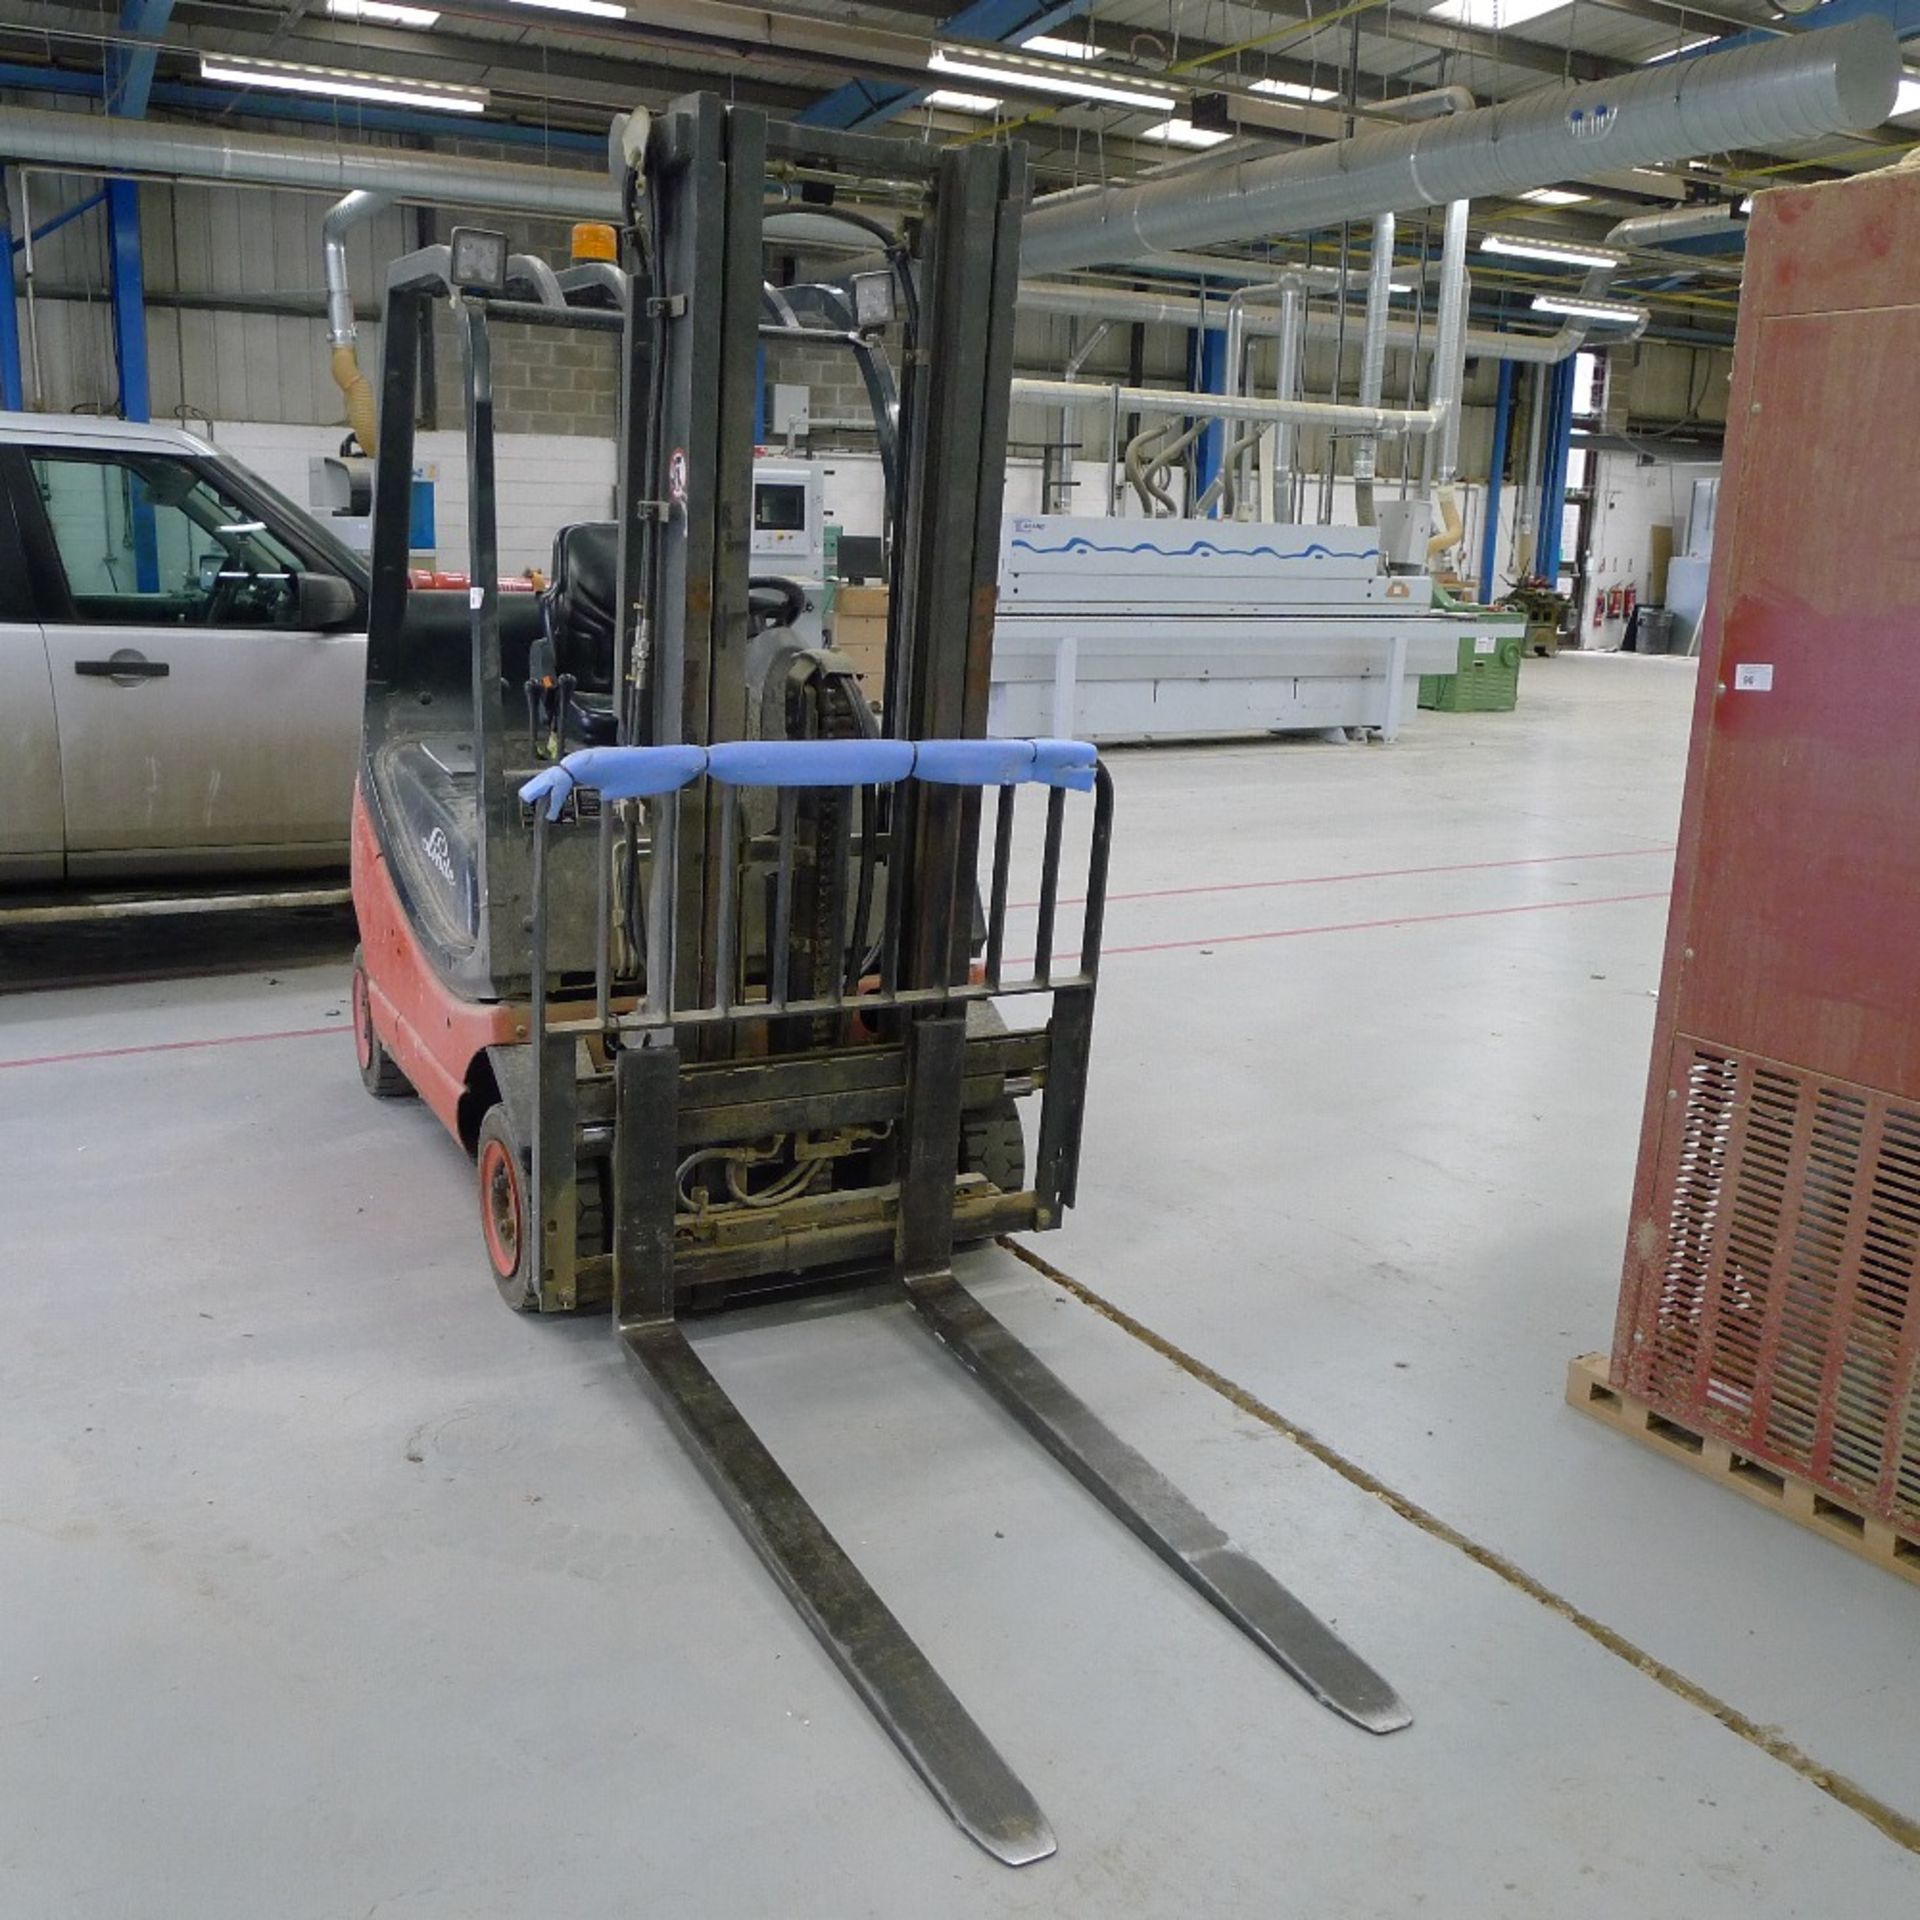 1 LPG forklift truck by Linde type H16T-03, YOM 2004, s/n H2X350R02297, capacity 1600kg, 2502 - Image 3 of 10